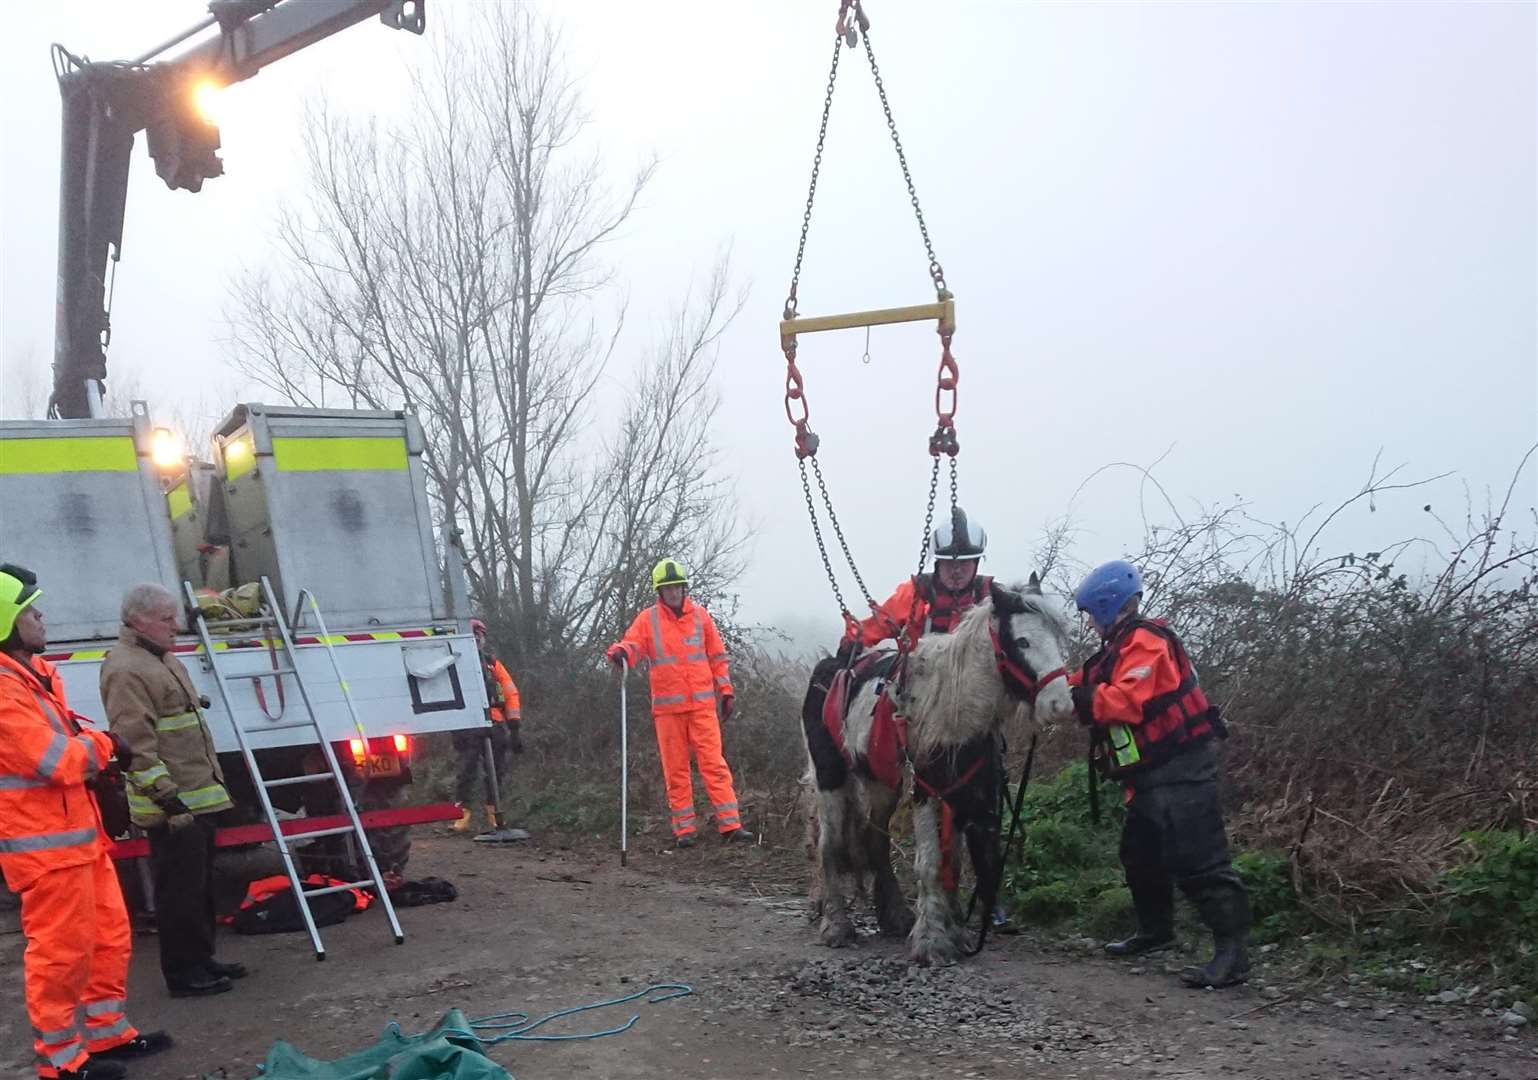 The horse was rescued from the ditch (7388428)